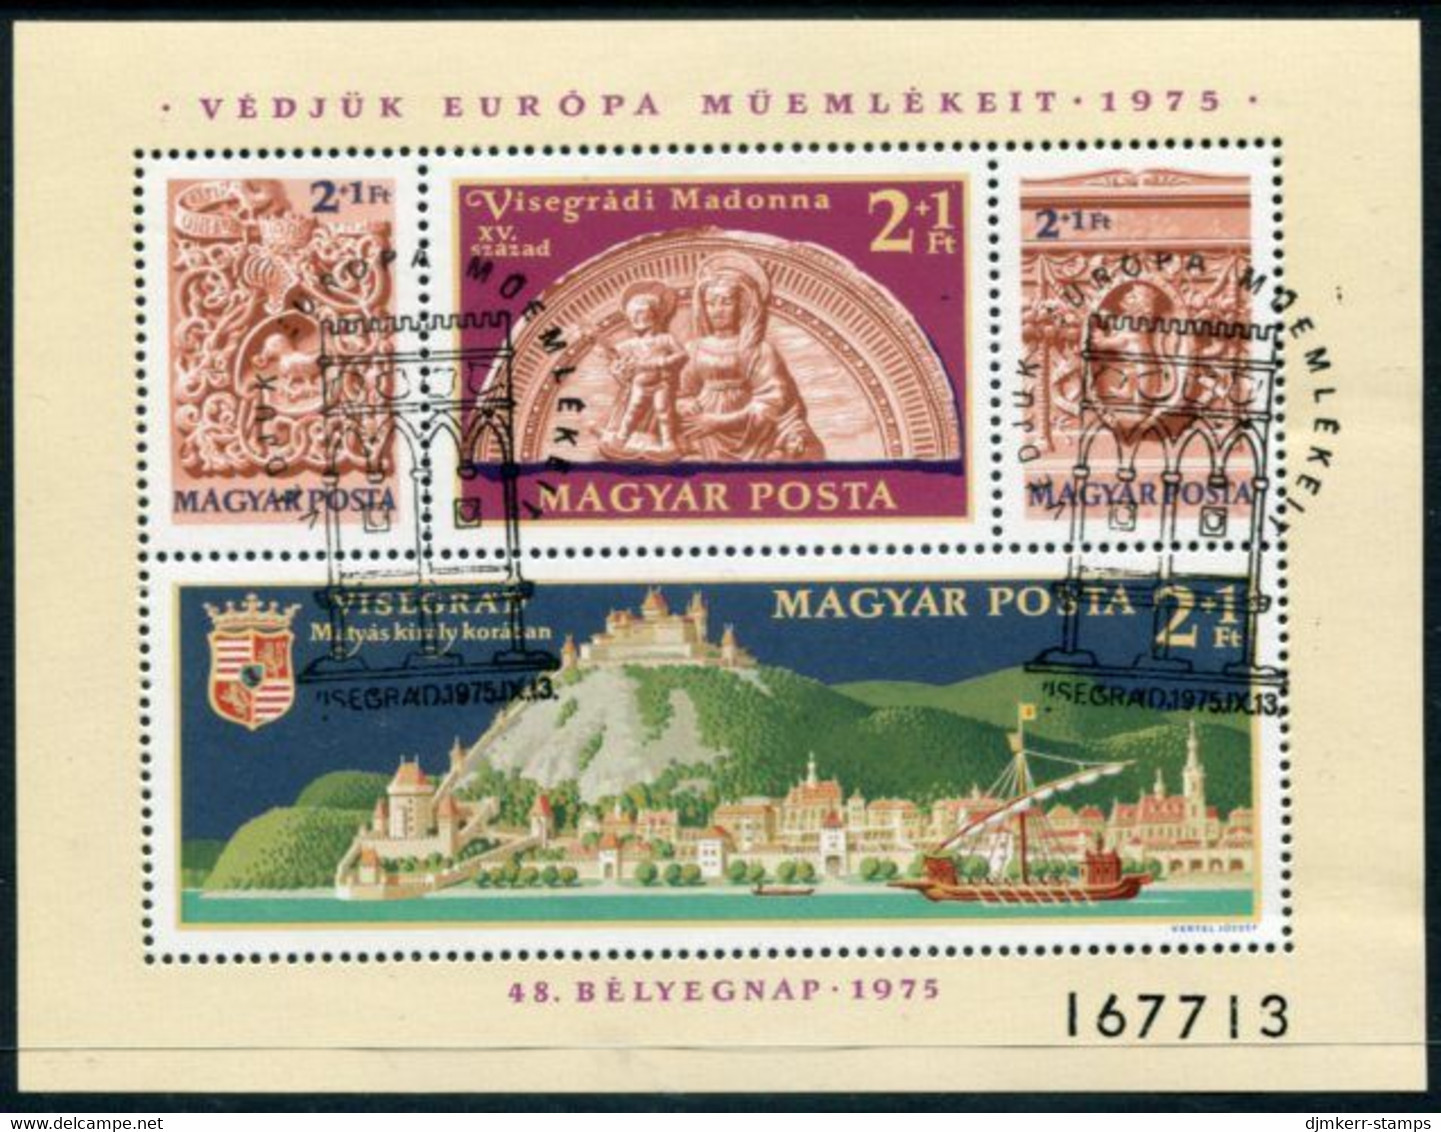 HUNGARY 1975 Stamp Day: Protection Of Monuments Block Used..  Michel Block 115 - Blocs-feuillets